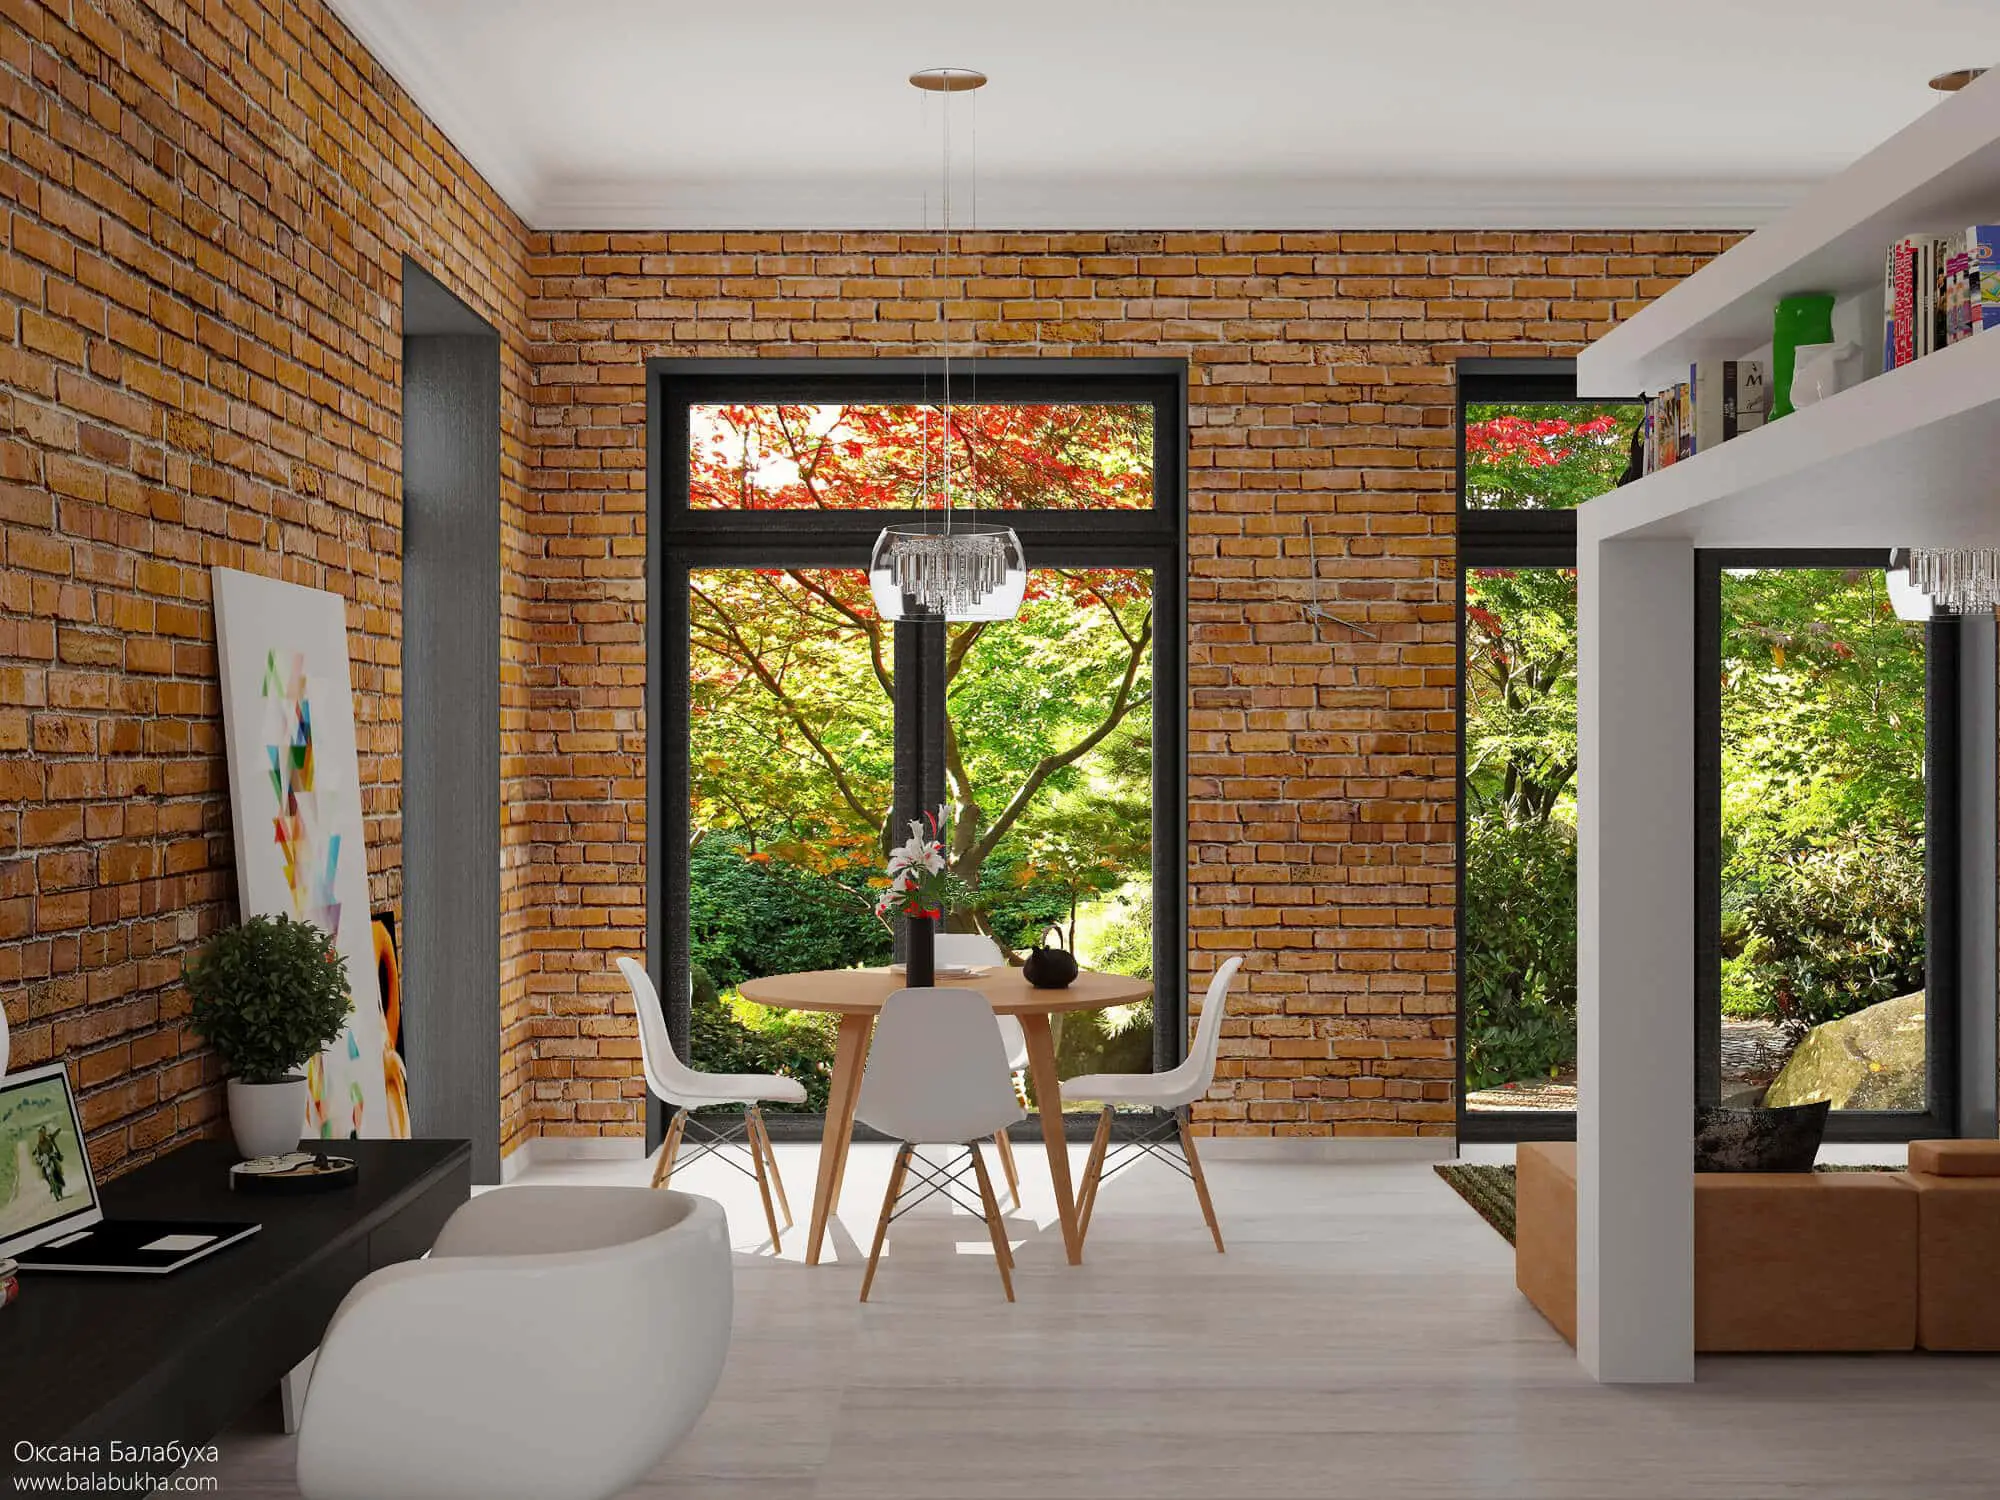 How To Clean Interior Brick Wall 